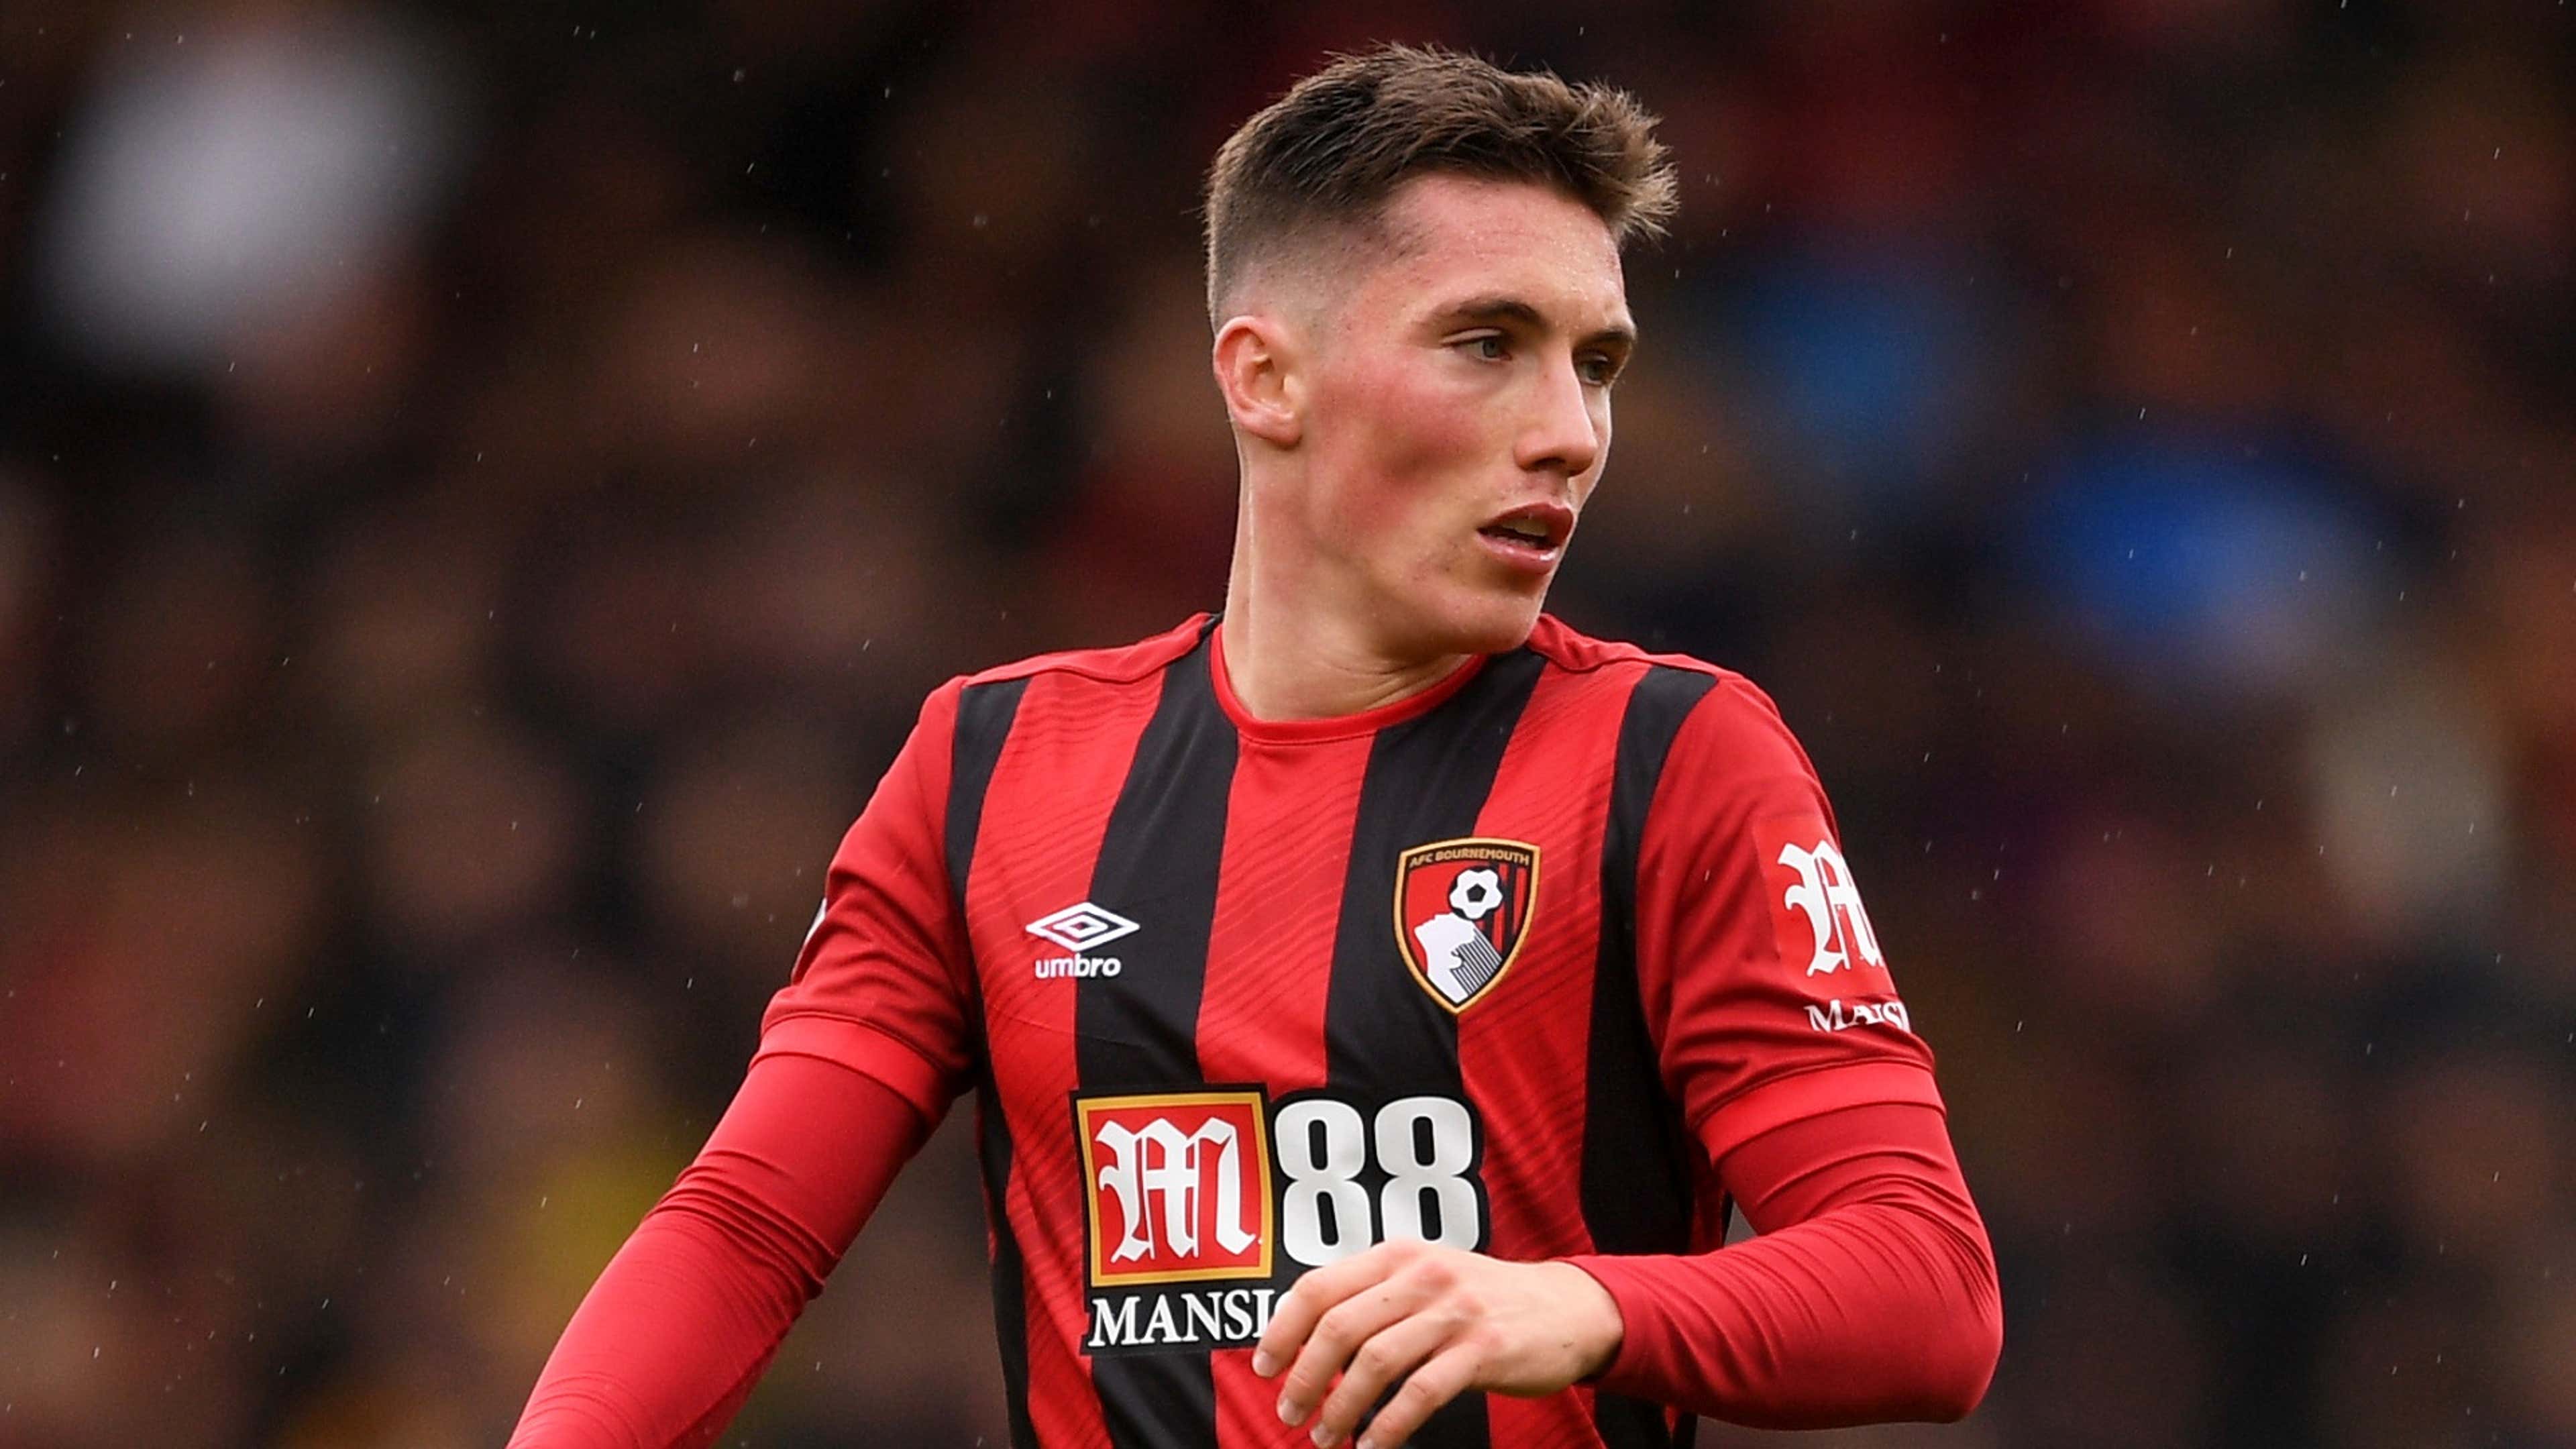 Liverpool's Harry Wilson takes to Twitter after achieving career